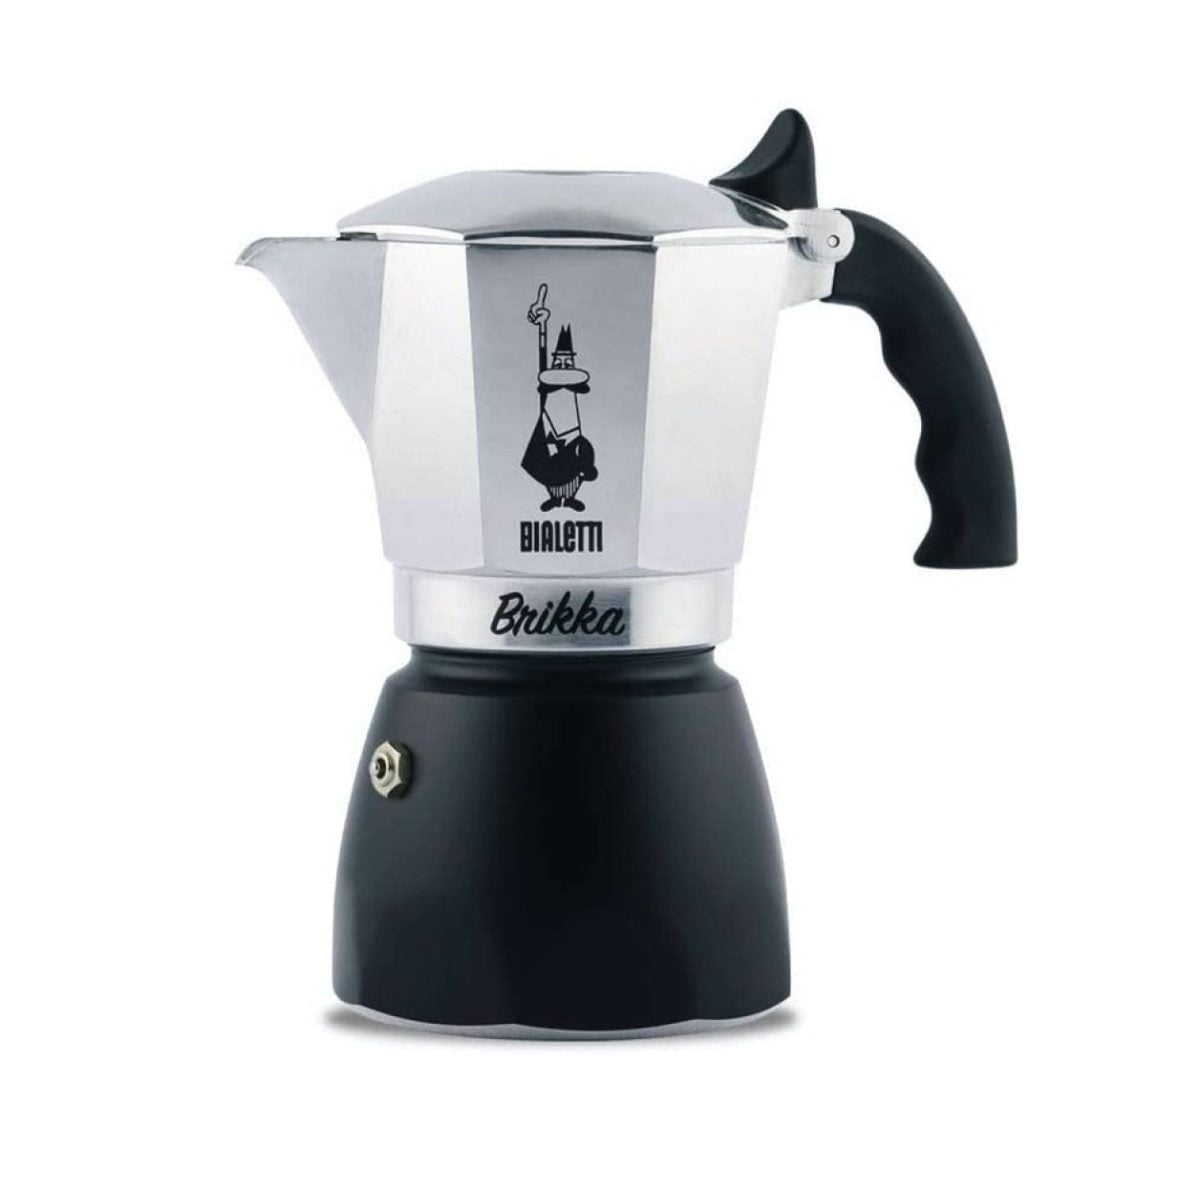 0042498 Bialetti Moka Pot Brikka 4 Cup 1000X1000 1 Bialetti &Amp;Lt;H1&Amp;Gt;Bialetti Moka Pot Brikka 4 Cups&Amp;Lt;/H1&Amp;Gt; The Brikka Model, Which Has The Most Special Place Among The Bialetti Moka Pots, Works At Higher Pressure Thanks To Its Special Design, Thus Allowing You To Enjoy A Creamy, Foamy And Intense Coffee. &Amp;Lt;Strong&Amp;Gt;It Consists Of Three Parts:&Amp;Lt;/Strong&Amp;Gt; The Bottom-Up Water Reservoir, The Filter Where You Will Put The Ground Coffee And The Reservoir Where The Espresso Will Be Filled. &Amp;Lt;Ul&Amp;Gt; &Amp;Lt;Li&Amp;Gt;Made Of Aluminium Casting Material.&Amp;Lt;/Li&Amp;Gt; &Amp;Lt;Li&Amp;Gt;You Can Prepare 4 Shots Of Espresso (Approximately 240 Ml).&Amp;Lt;/Li&Amp;Gt; &Amp;Lt;Li&Amp;Gt;Not To Be Washed In The Dishwasher, Can Only Be Cleaned With Water.&Amp;Lt;/Li&Amp;Gt; &Amp;Lt;/Ul&Amp;Gt; Https://Youtu.be/O2Xi-1Ae2Rg Bialetti Moka Pot Brikka 4 Cup - Espresso Coffee